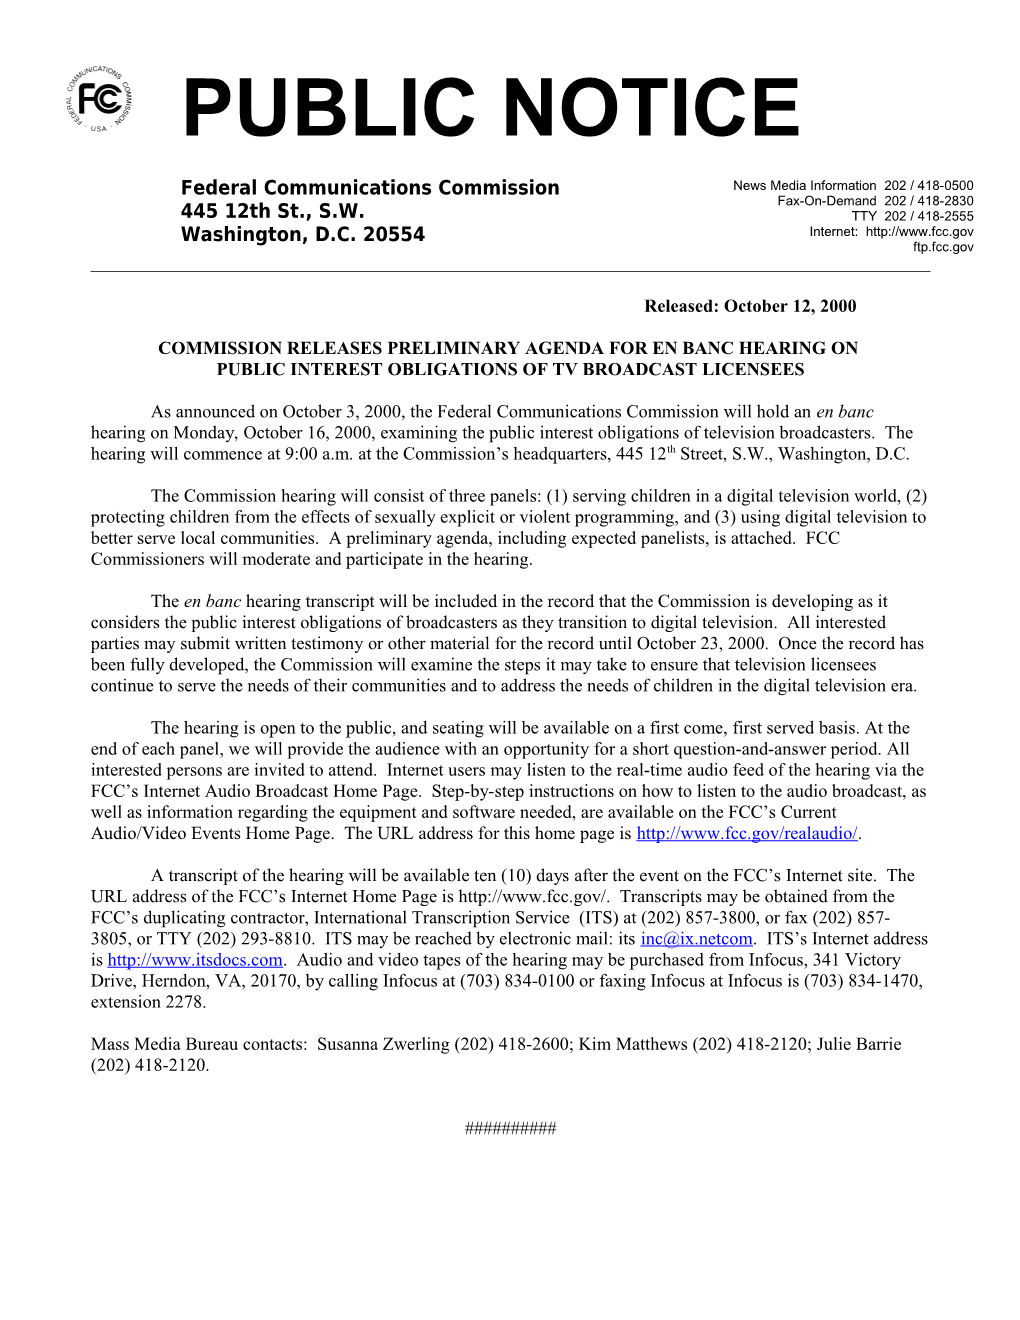 Commission Releases Preliminary Agenda for En Banc Hearing On